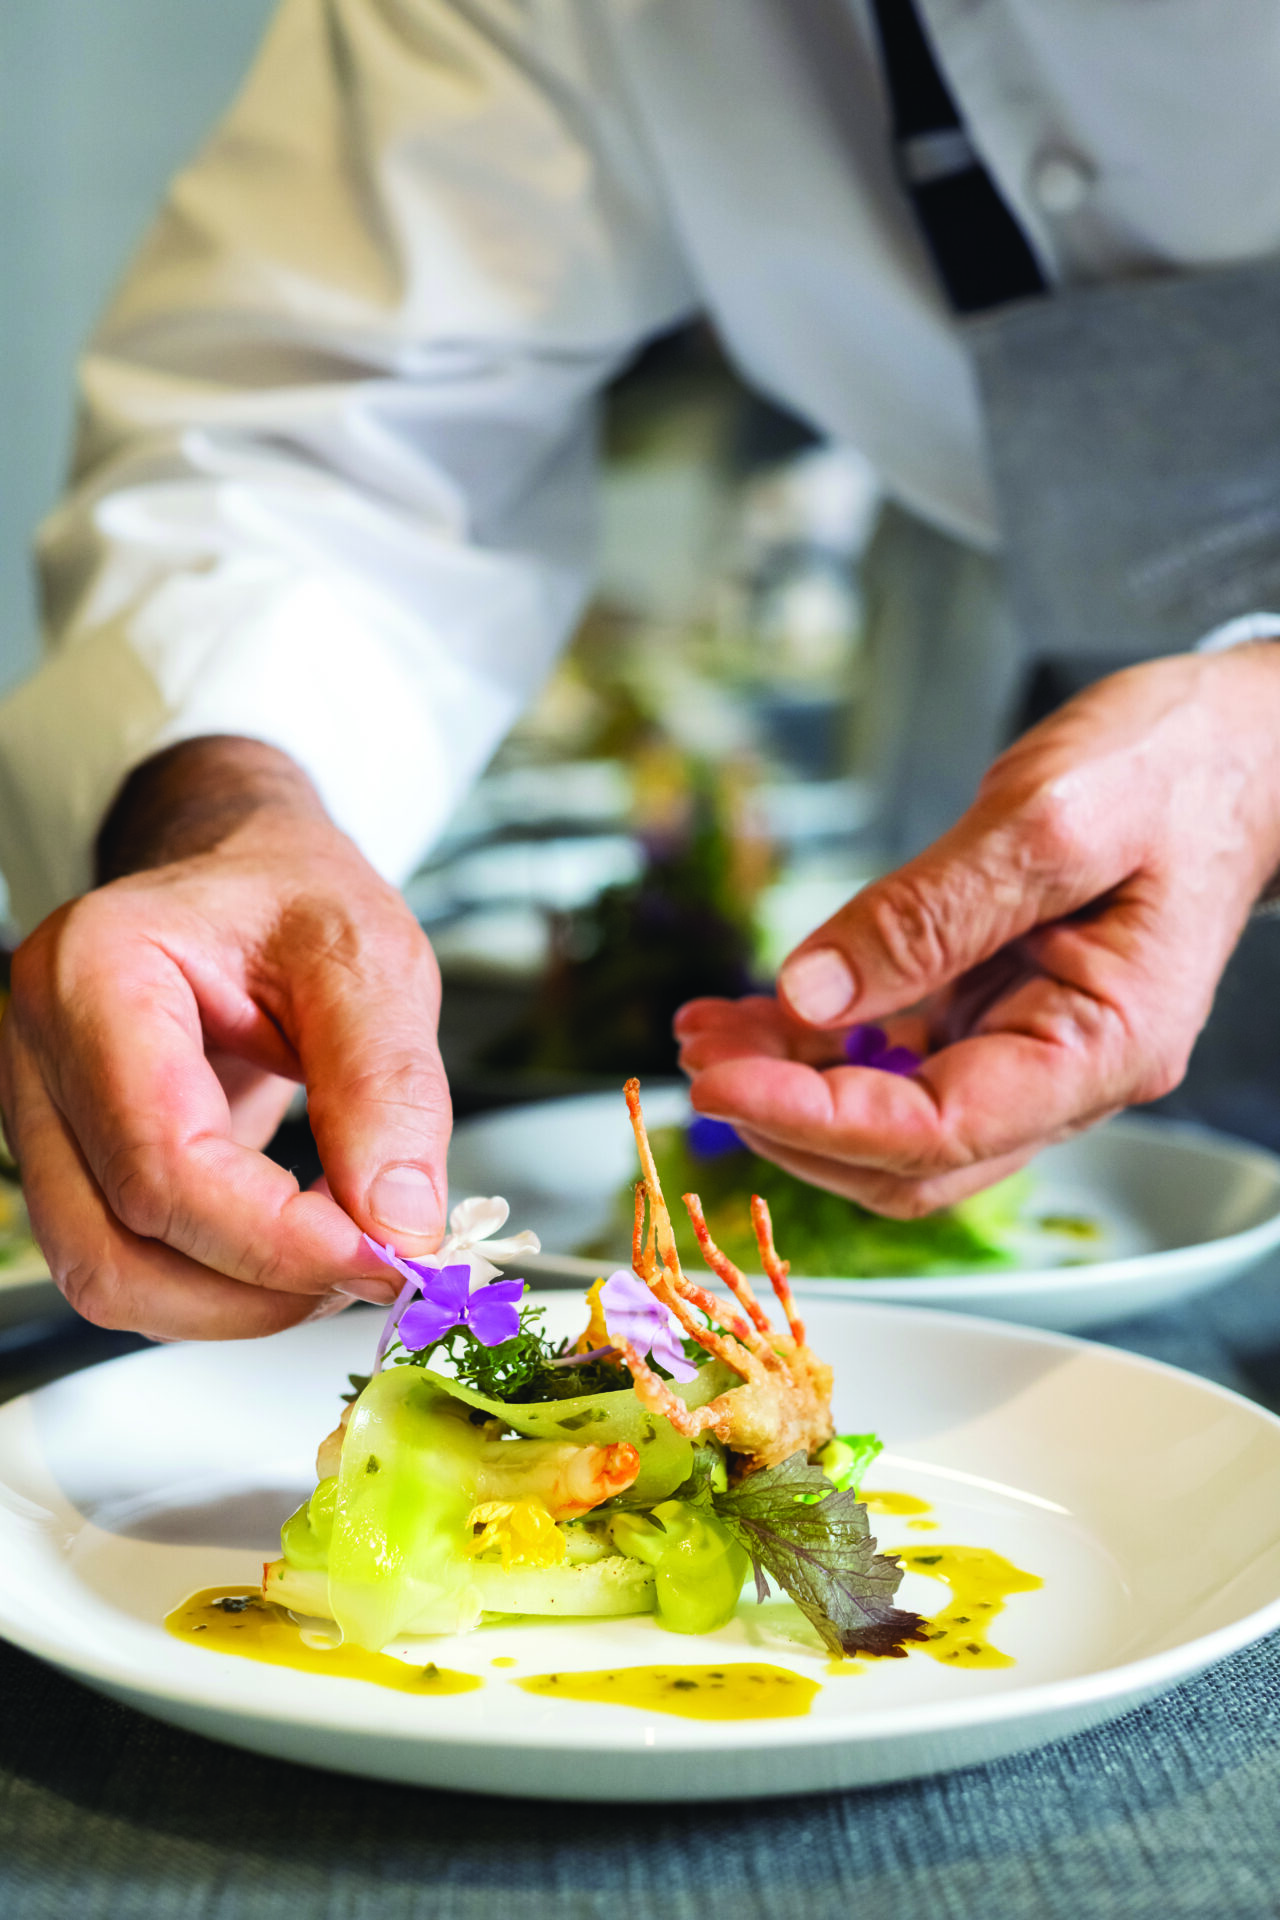 A chef is decorating the food of a dish.